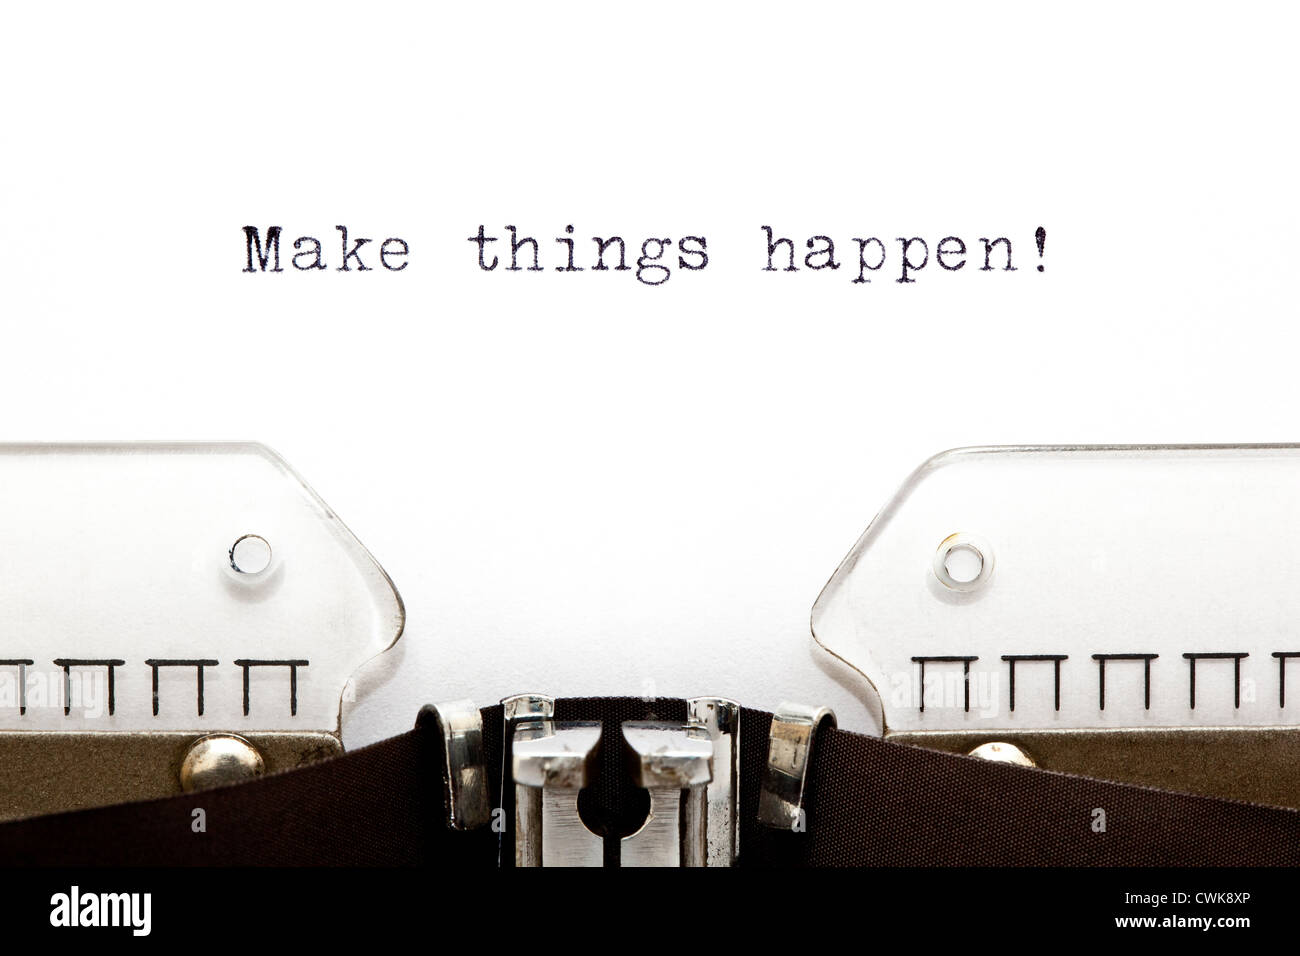 Concept image with Make Things Happen printed on an old typewriter Stock Photo